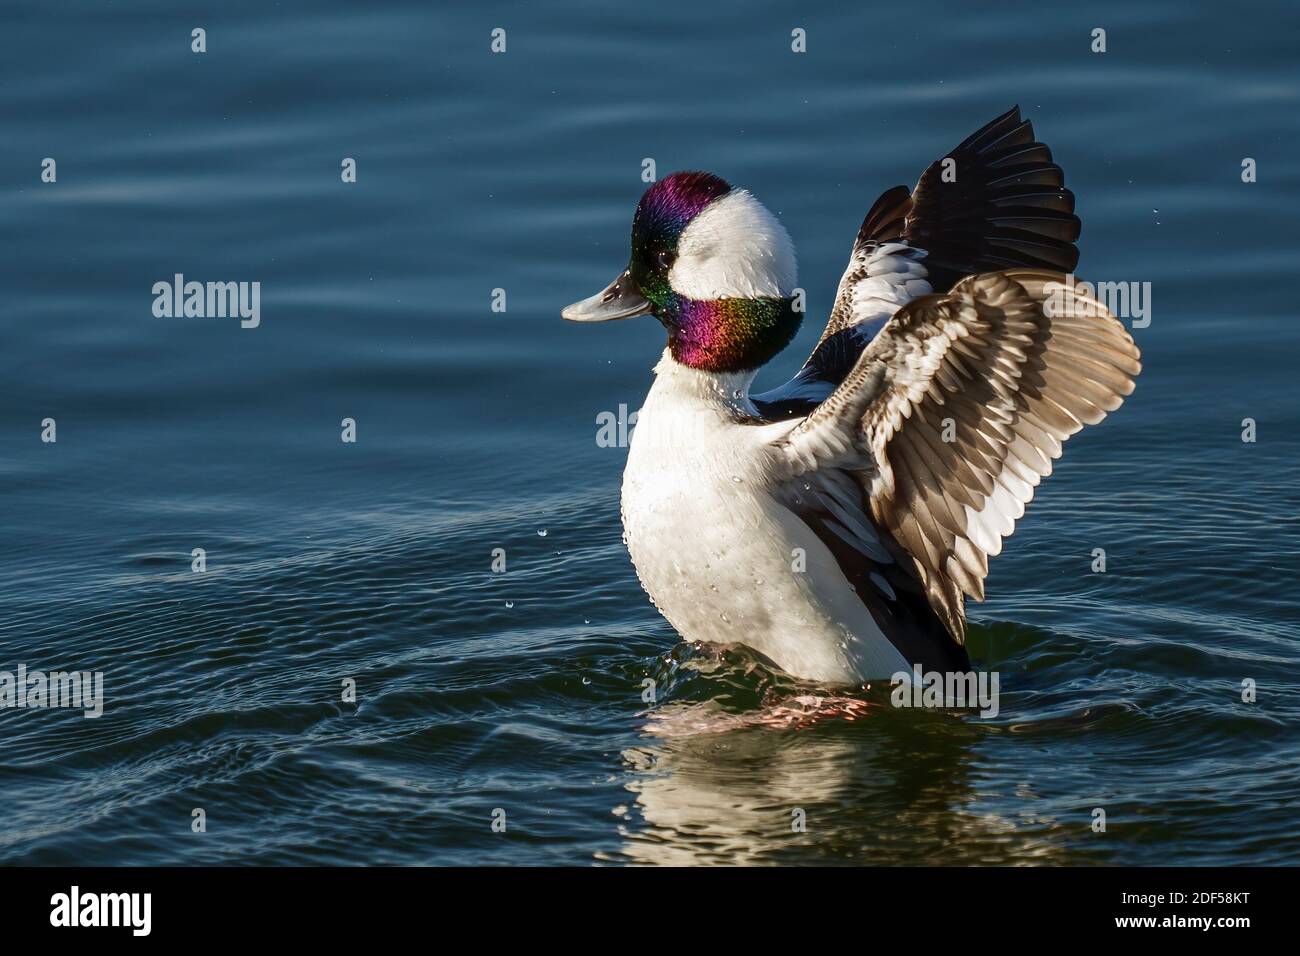 Huntington Beach, United States. 02nd Dec, 2020. A Bufflehead duck flaps  its wings at Bolsa Chica Ecological Reserve in Huntington Beach,  California. The reserve is about 1,300 acre of coastal estuary and